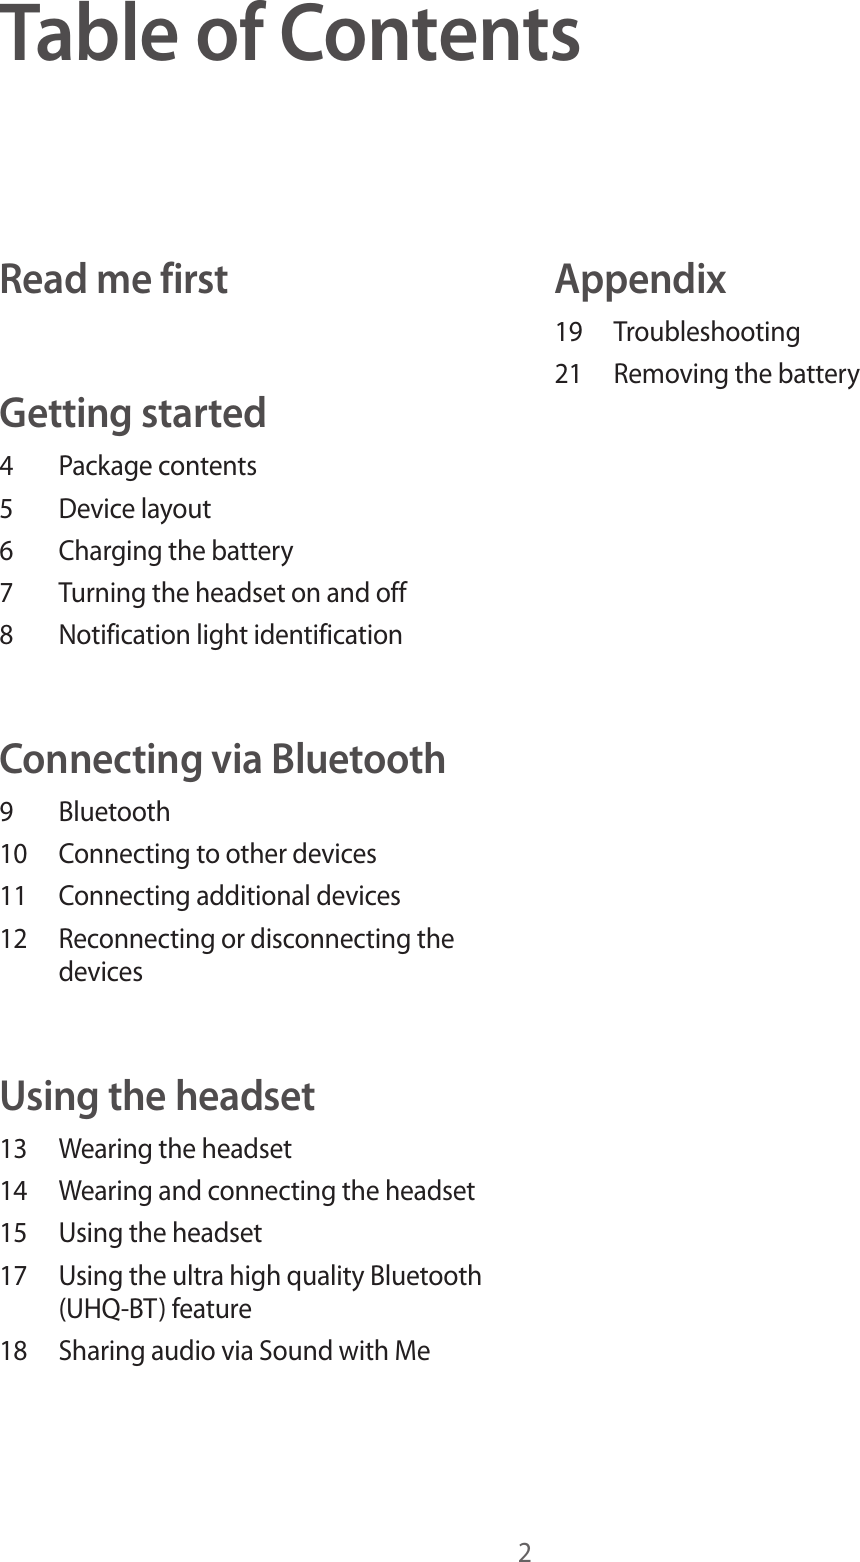 2Table of ContentsRead me firstGetting started4  Package contents5  Device layout6  Charging the battery7  Turning the headset on and off8  Notification light identificationConnecting via Bluetooth9 Bluetooth10  Connecting to other devices11  Connecting additional devices12  Reconnecting or disconnecting the devicesUsing the headset13  Wearing the headset14  Wearing and connecting the headset15  Using the headset17  Using the ultra high quality Bluetooth (UHQ-BT) feature18  Sharing audio via Sound with MeAppendix19 Troubleshooting21  Removing the battery